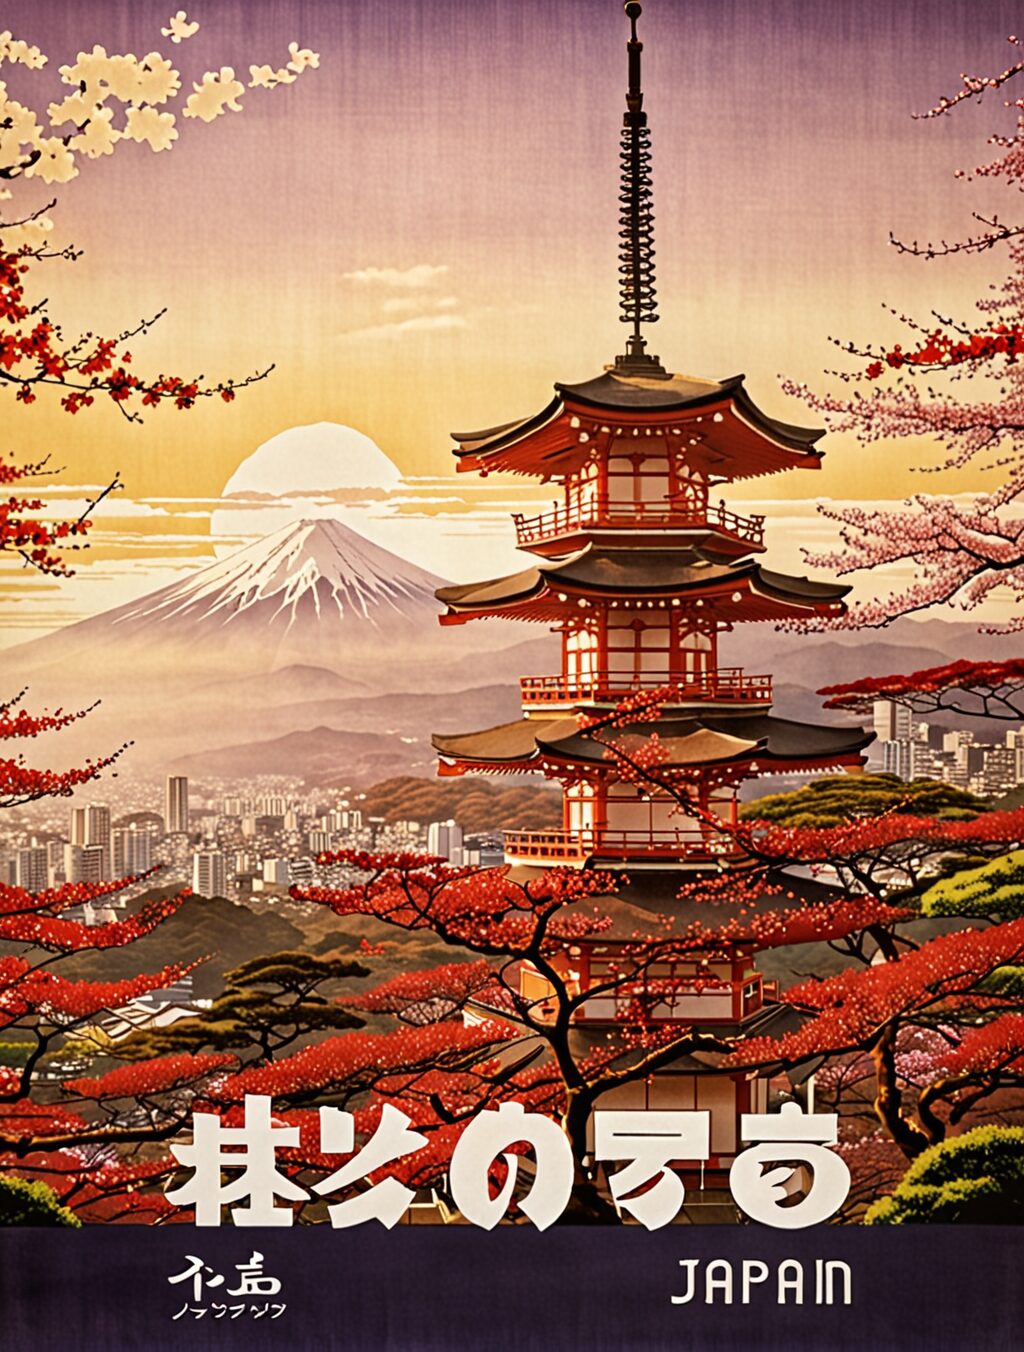 japan travel posters